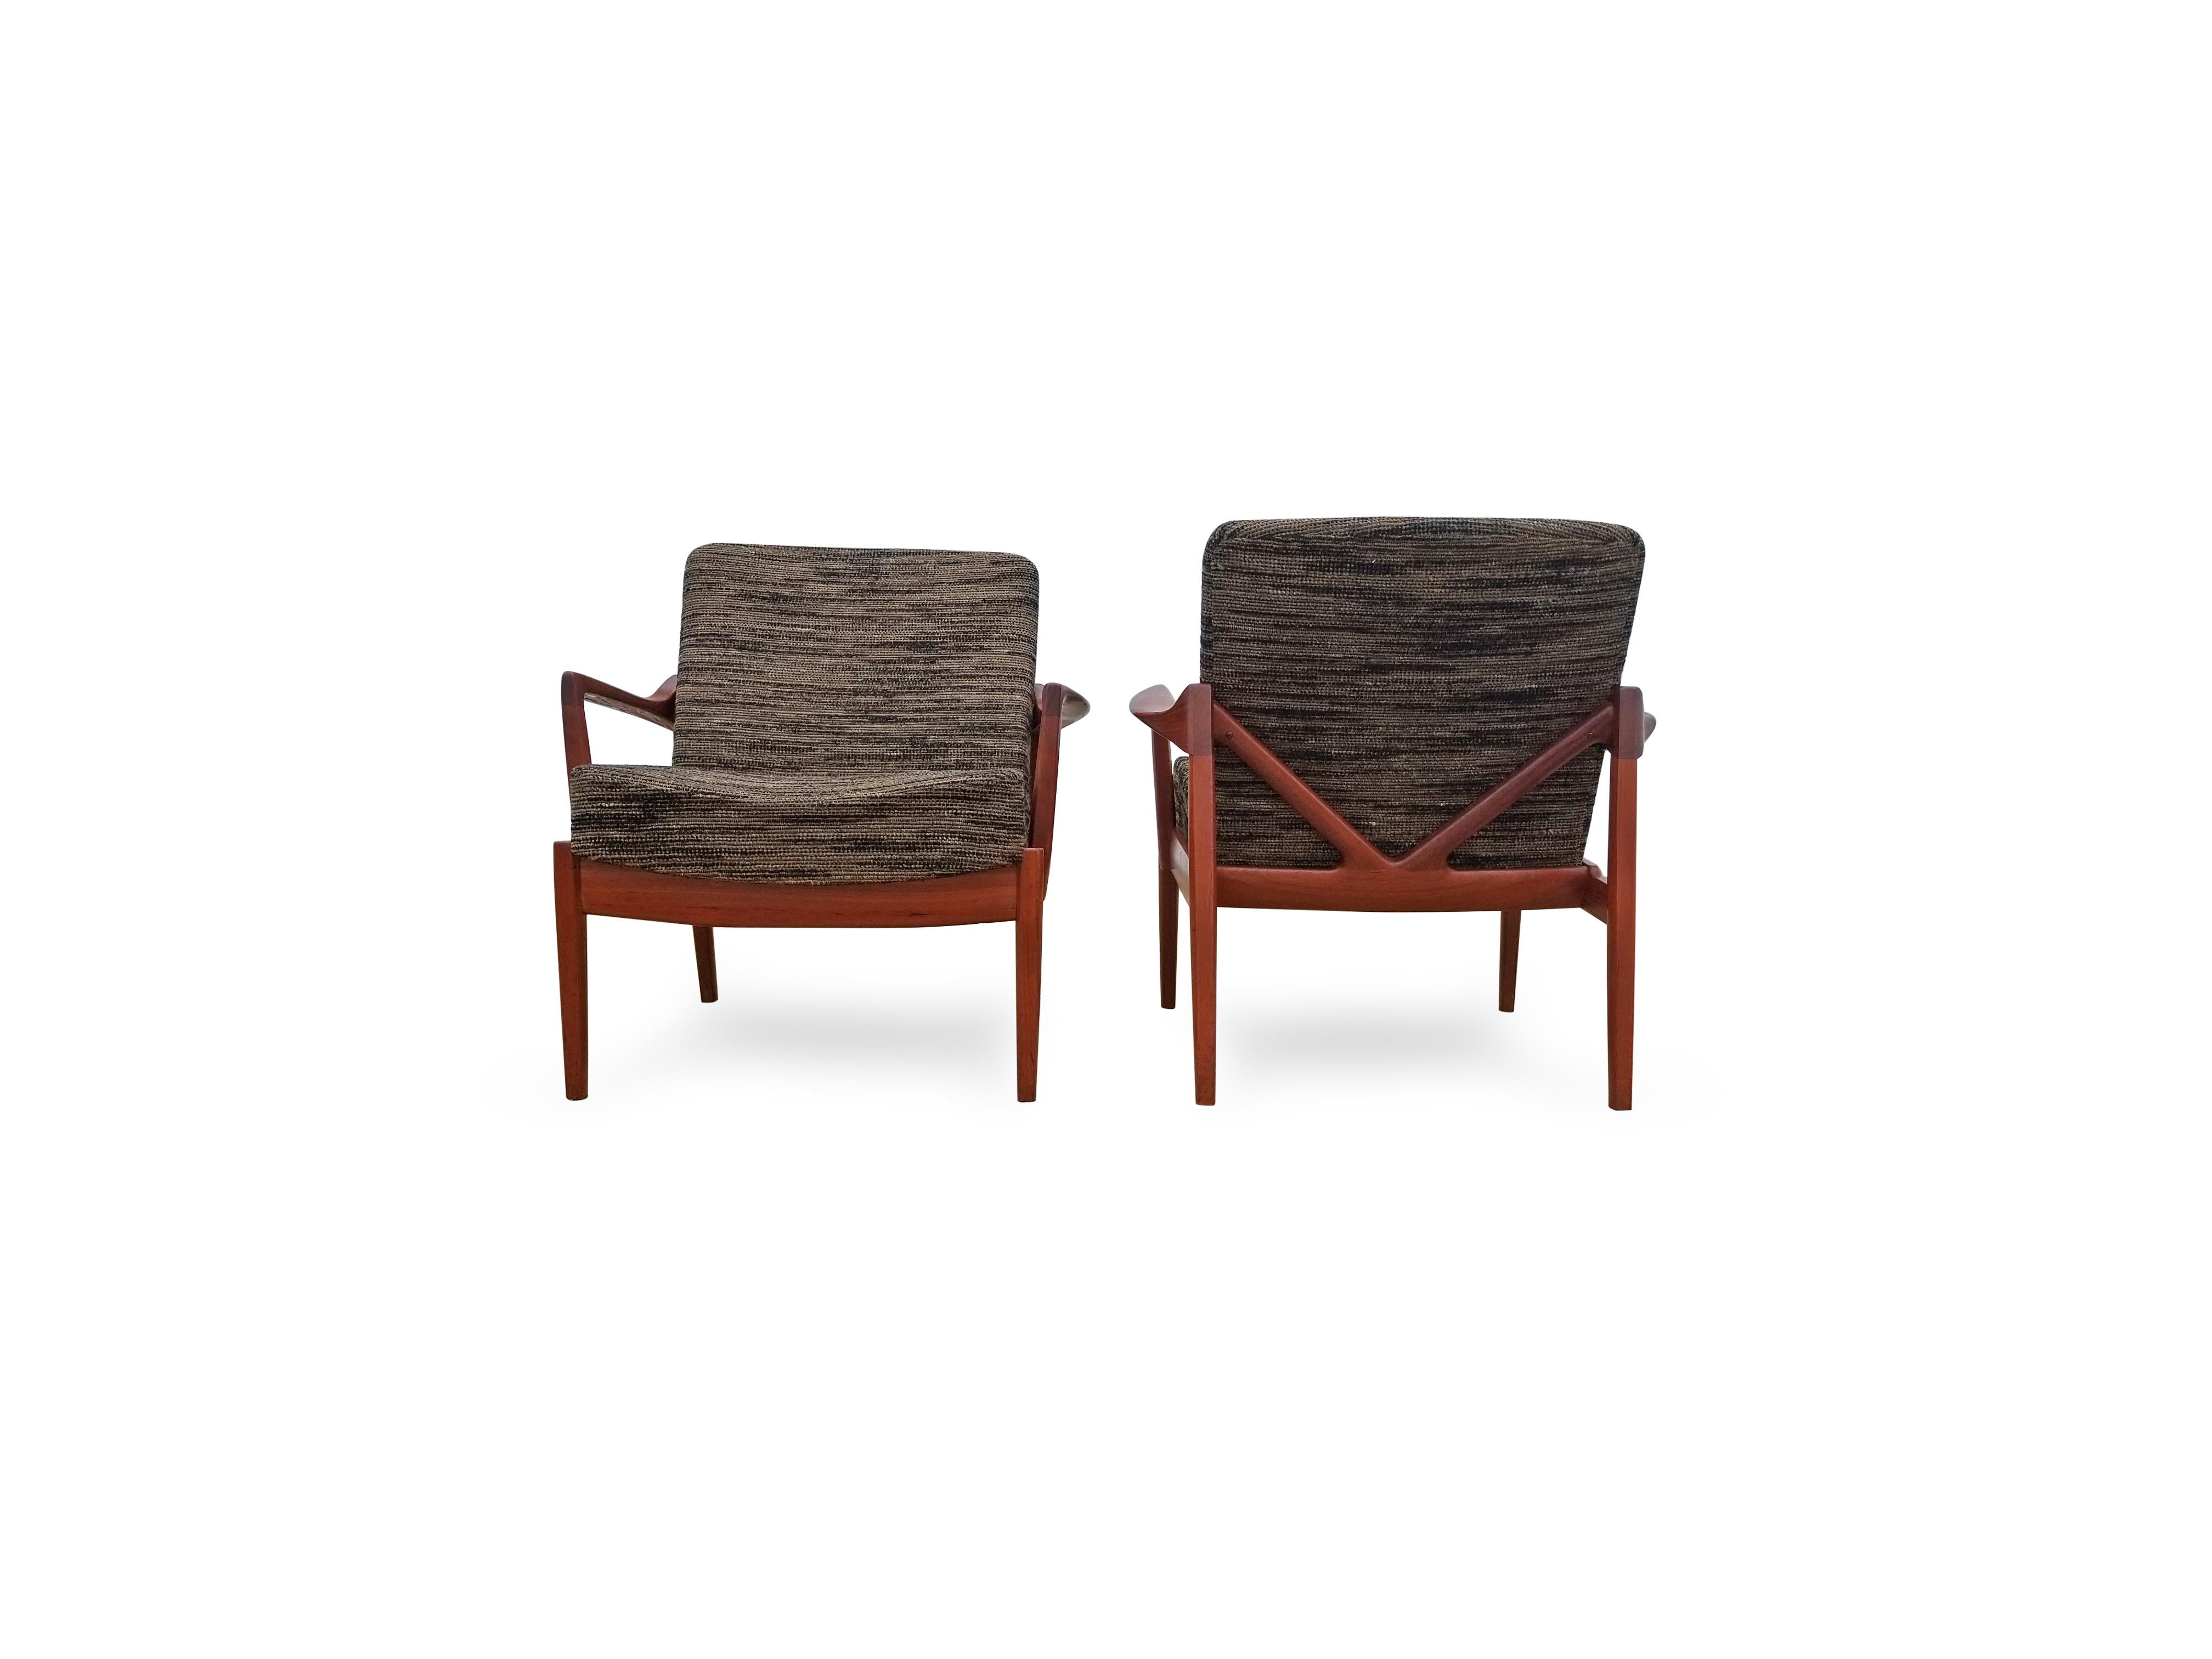 Pair of Tove and Edvard Kindt-Larsen lounge chairs.